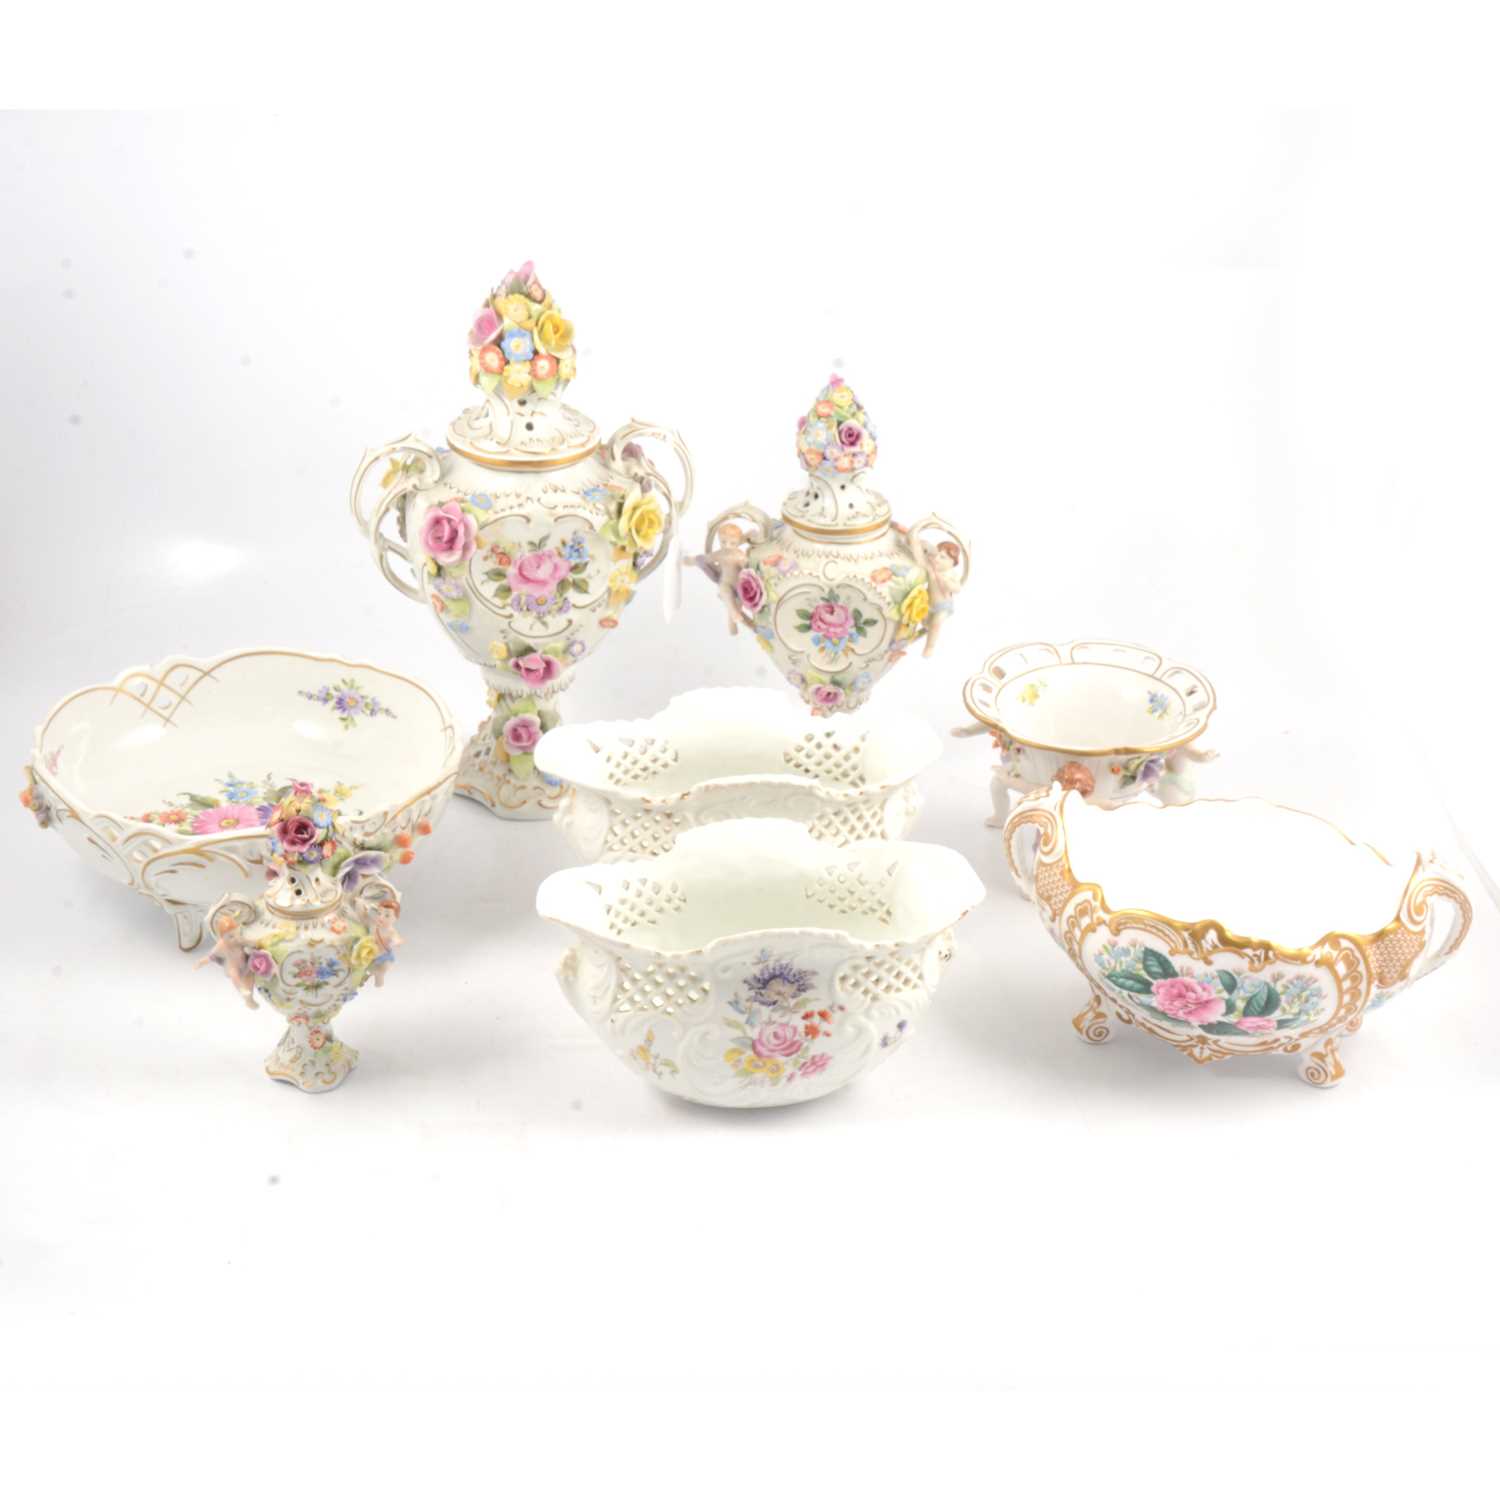 Lot 79 - Potpourri vases and other ornamental china